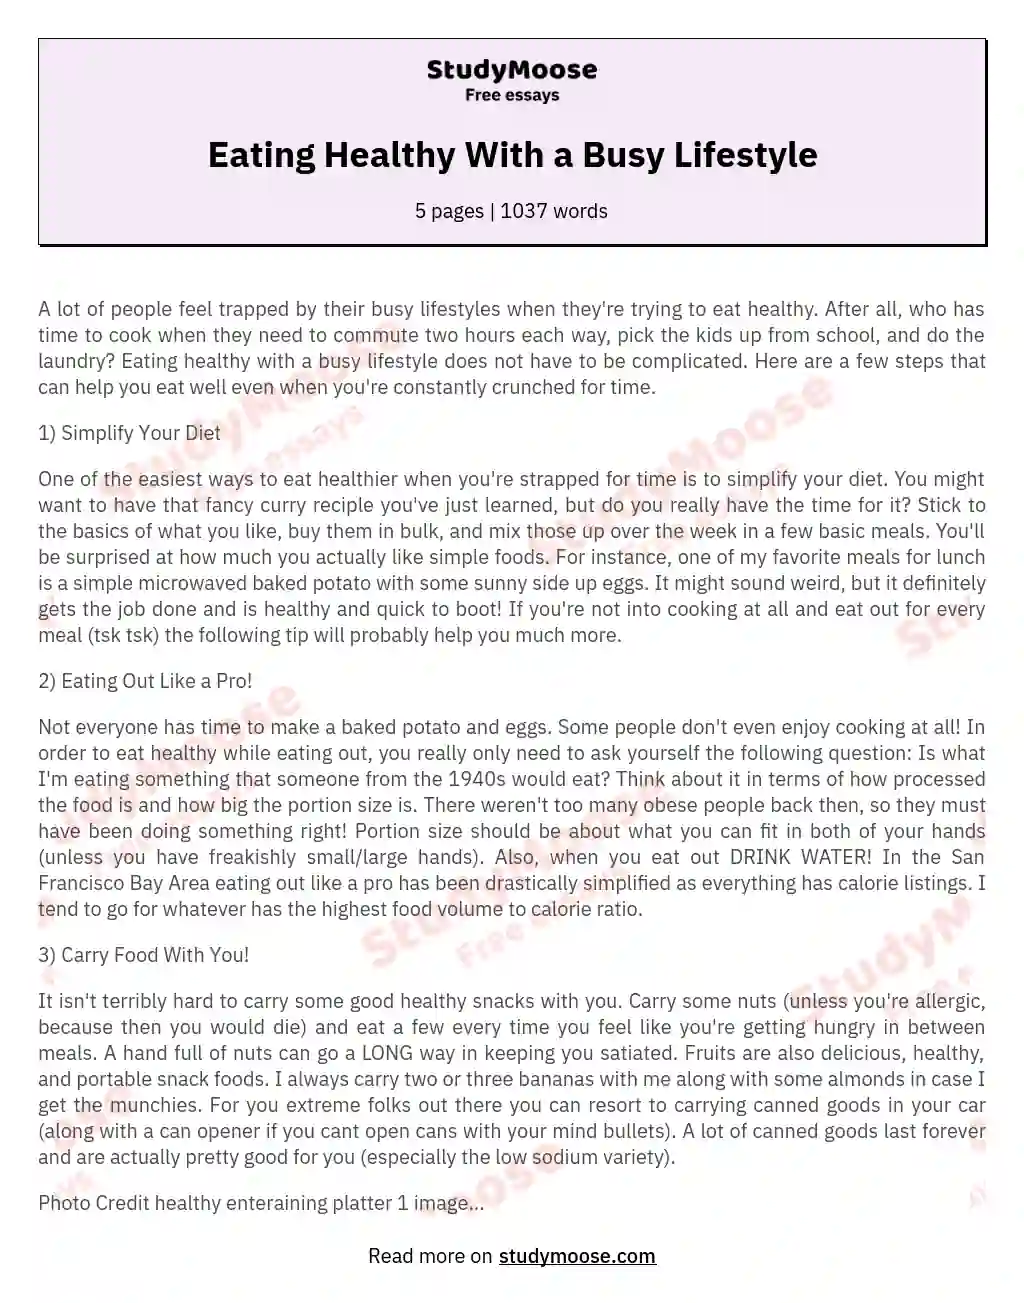 Eating Healthy With a Busy Lifestyle essay